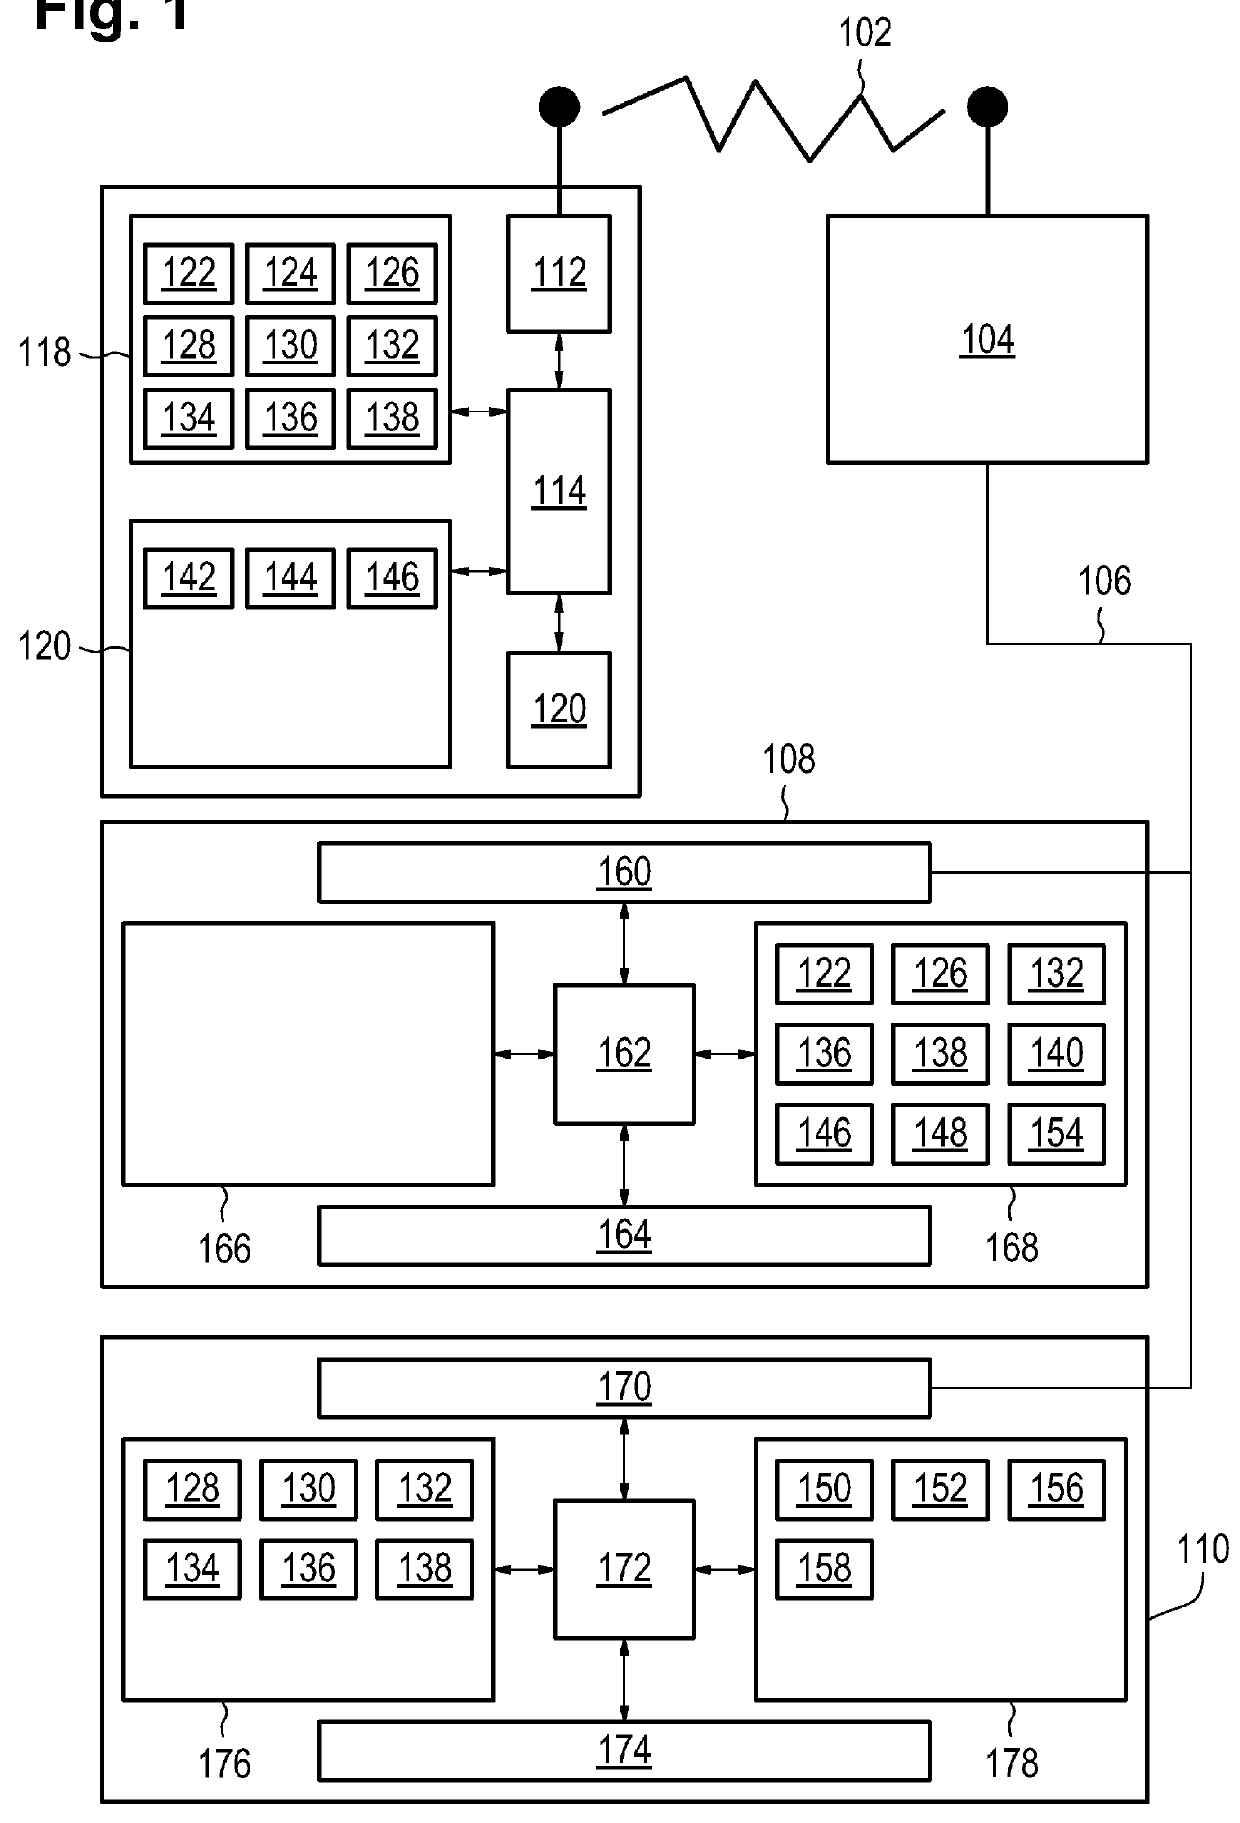 Telecommunication method for securely exchanging data